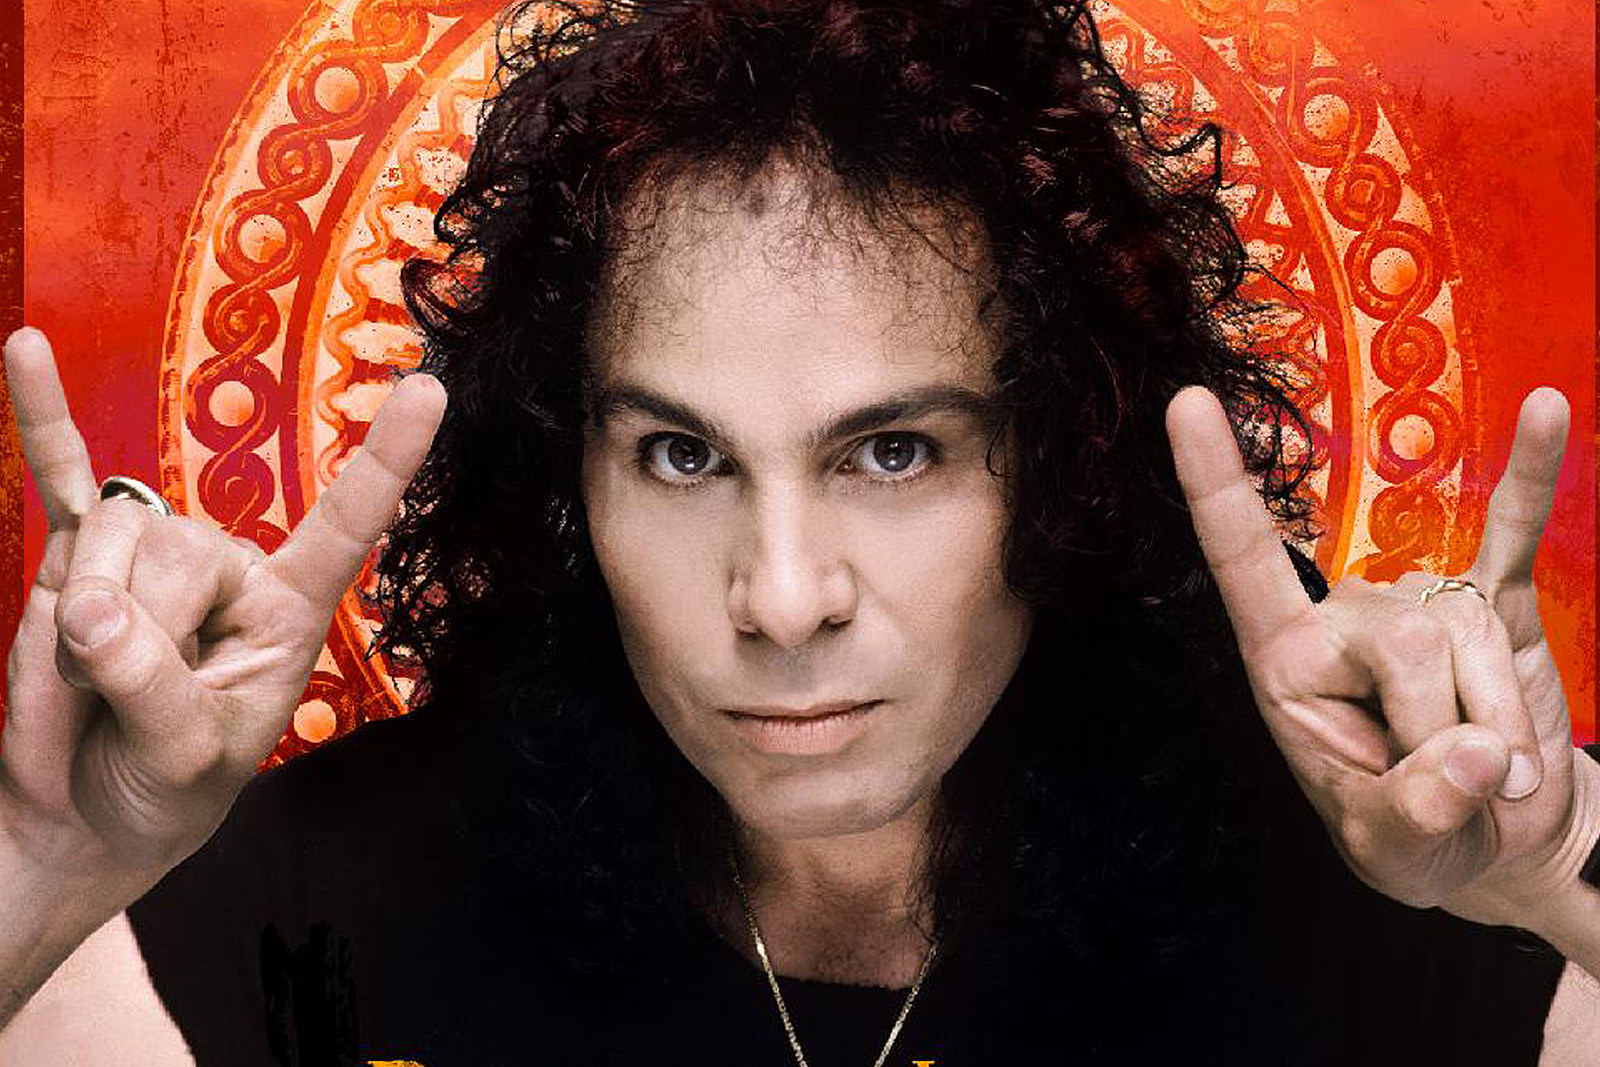 artists who changed genre - ronnie dio